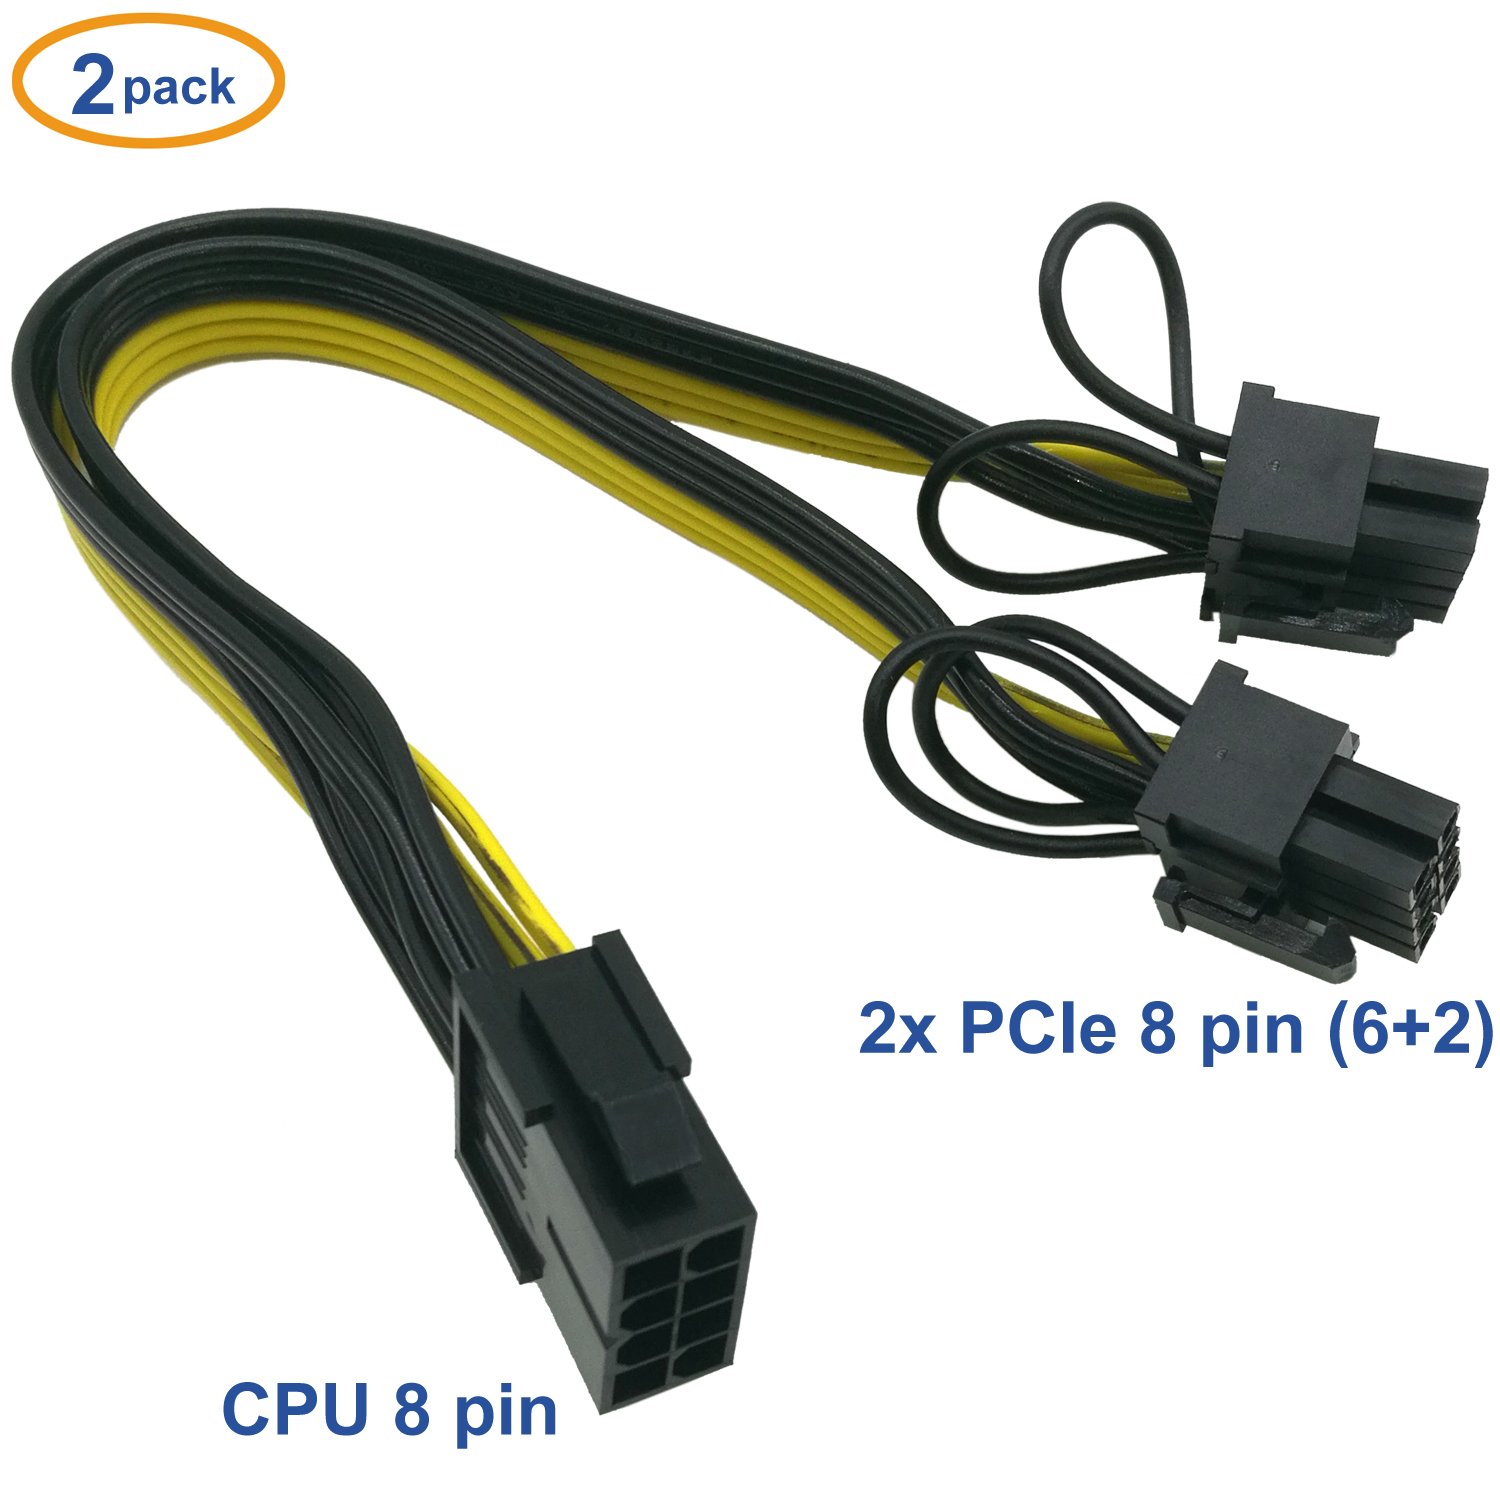 COMeap PCIe 8 Pin Male to Dual PCIe 2X 8 Pin 6+2 Male Power Adapter Cable for Seasonic Power Supply 25-inch+9-inch 63cm+23cm 